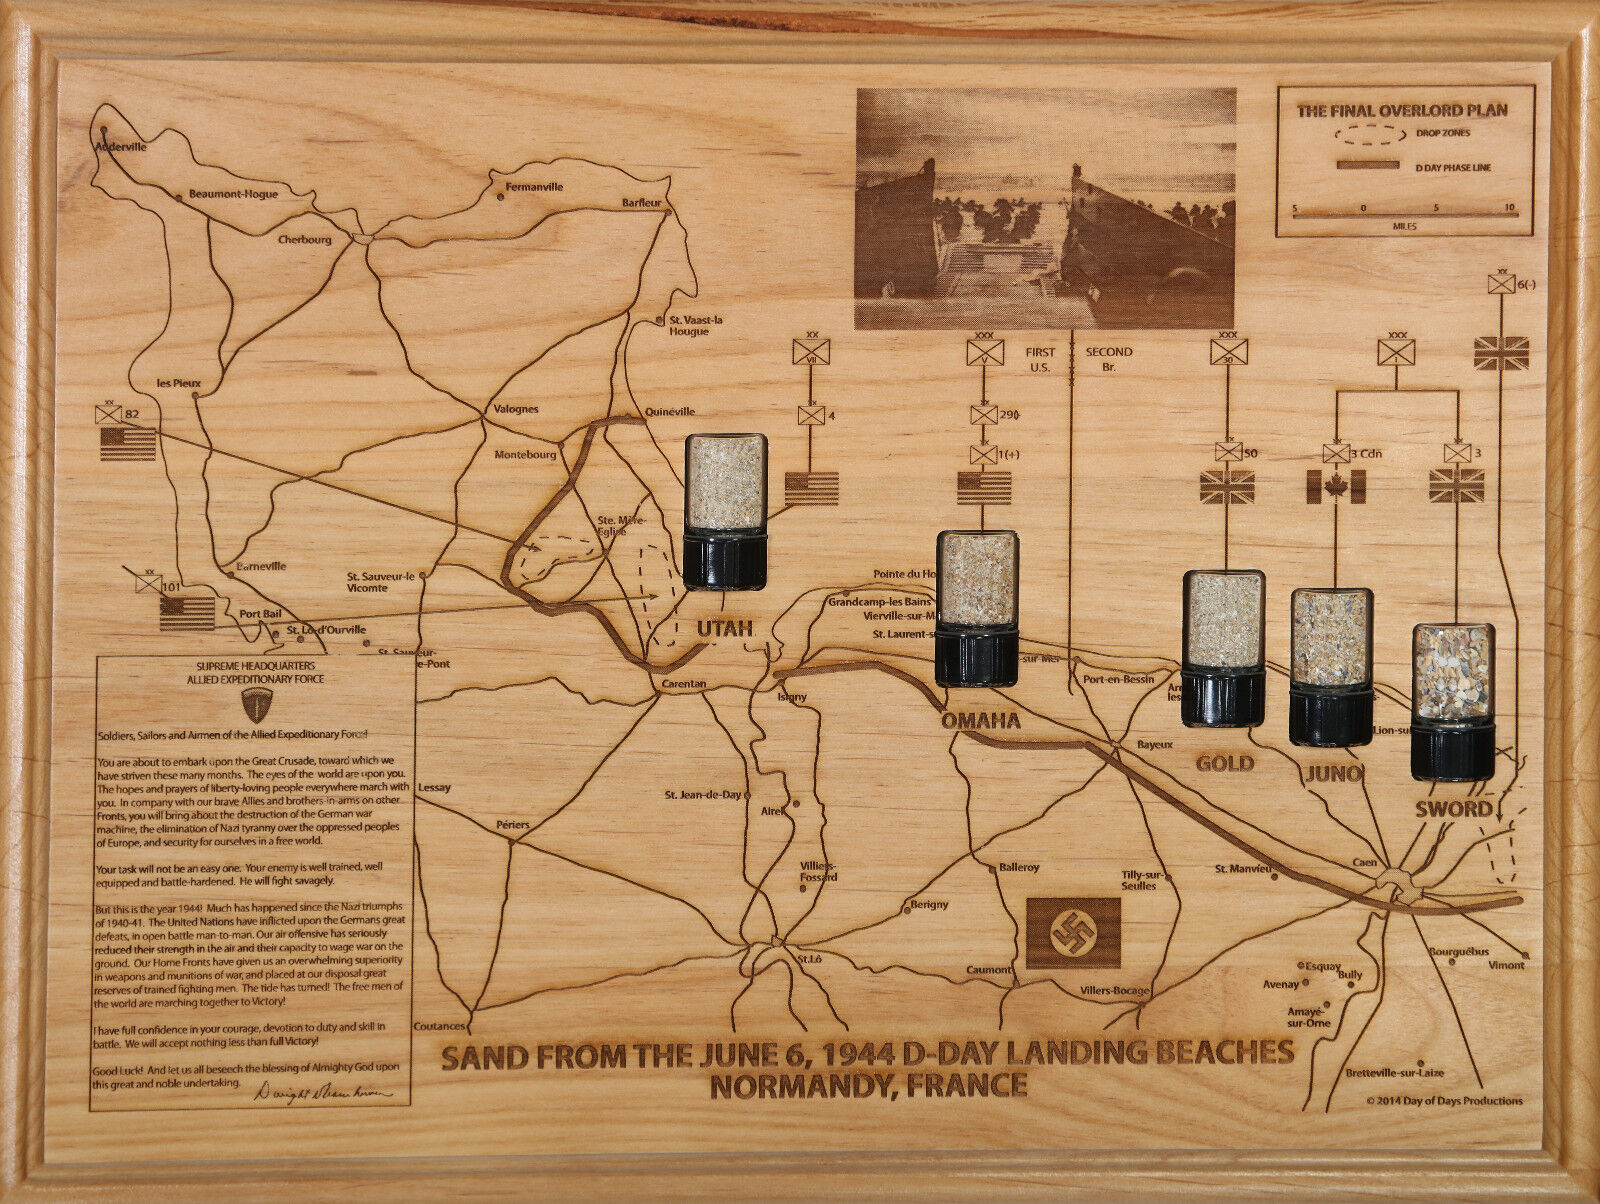 Final Overlord Plan Map June 6, 1944 D-Day Invasion Beach Sand From Normandy